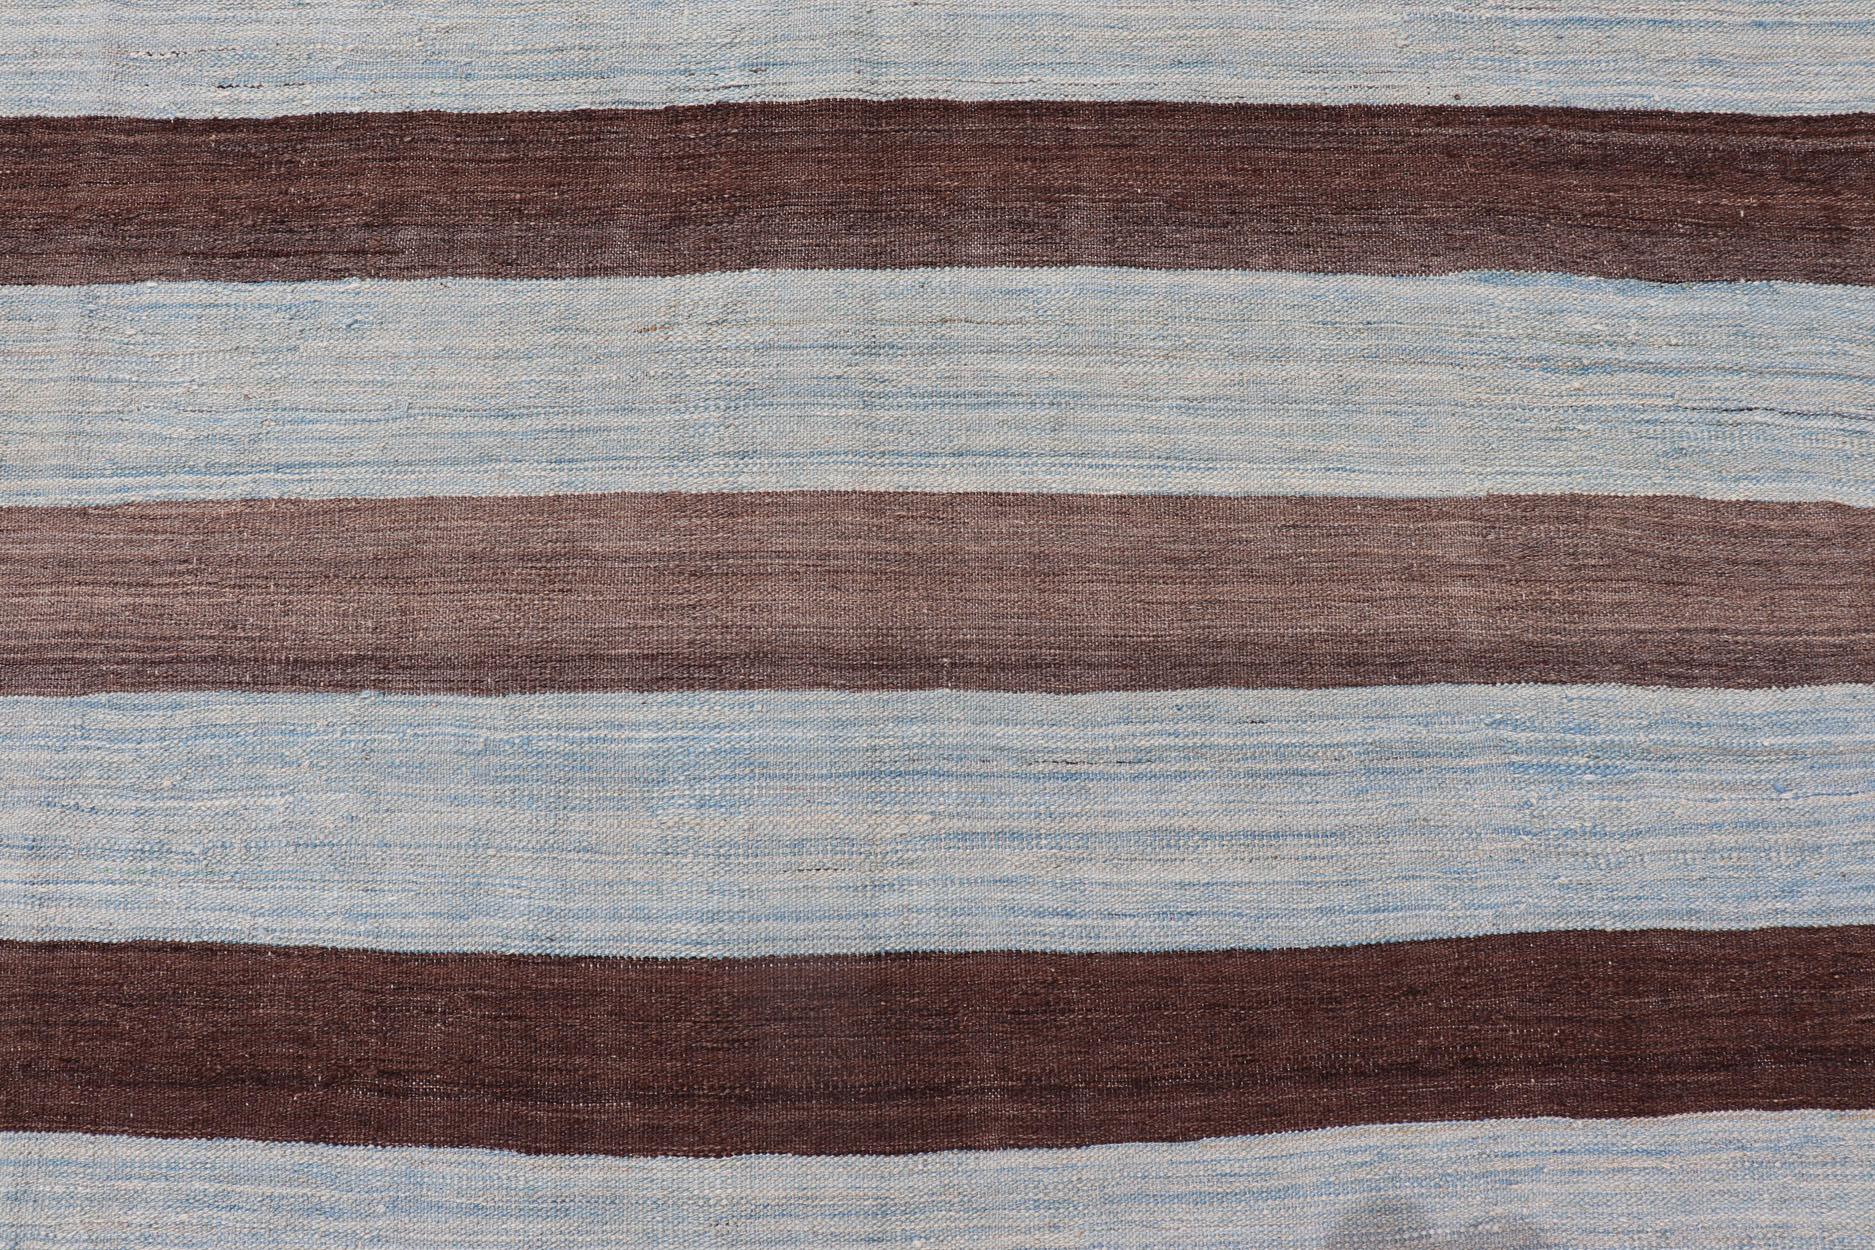 Modern Kilim Hand Woven Casual Rug with Stripes in Shades of Blue and Brown For Sale 1